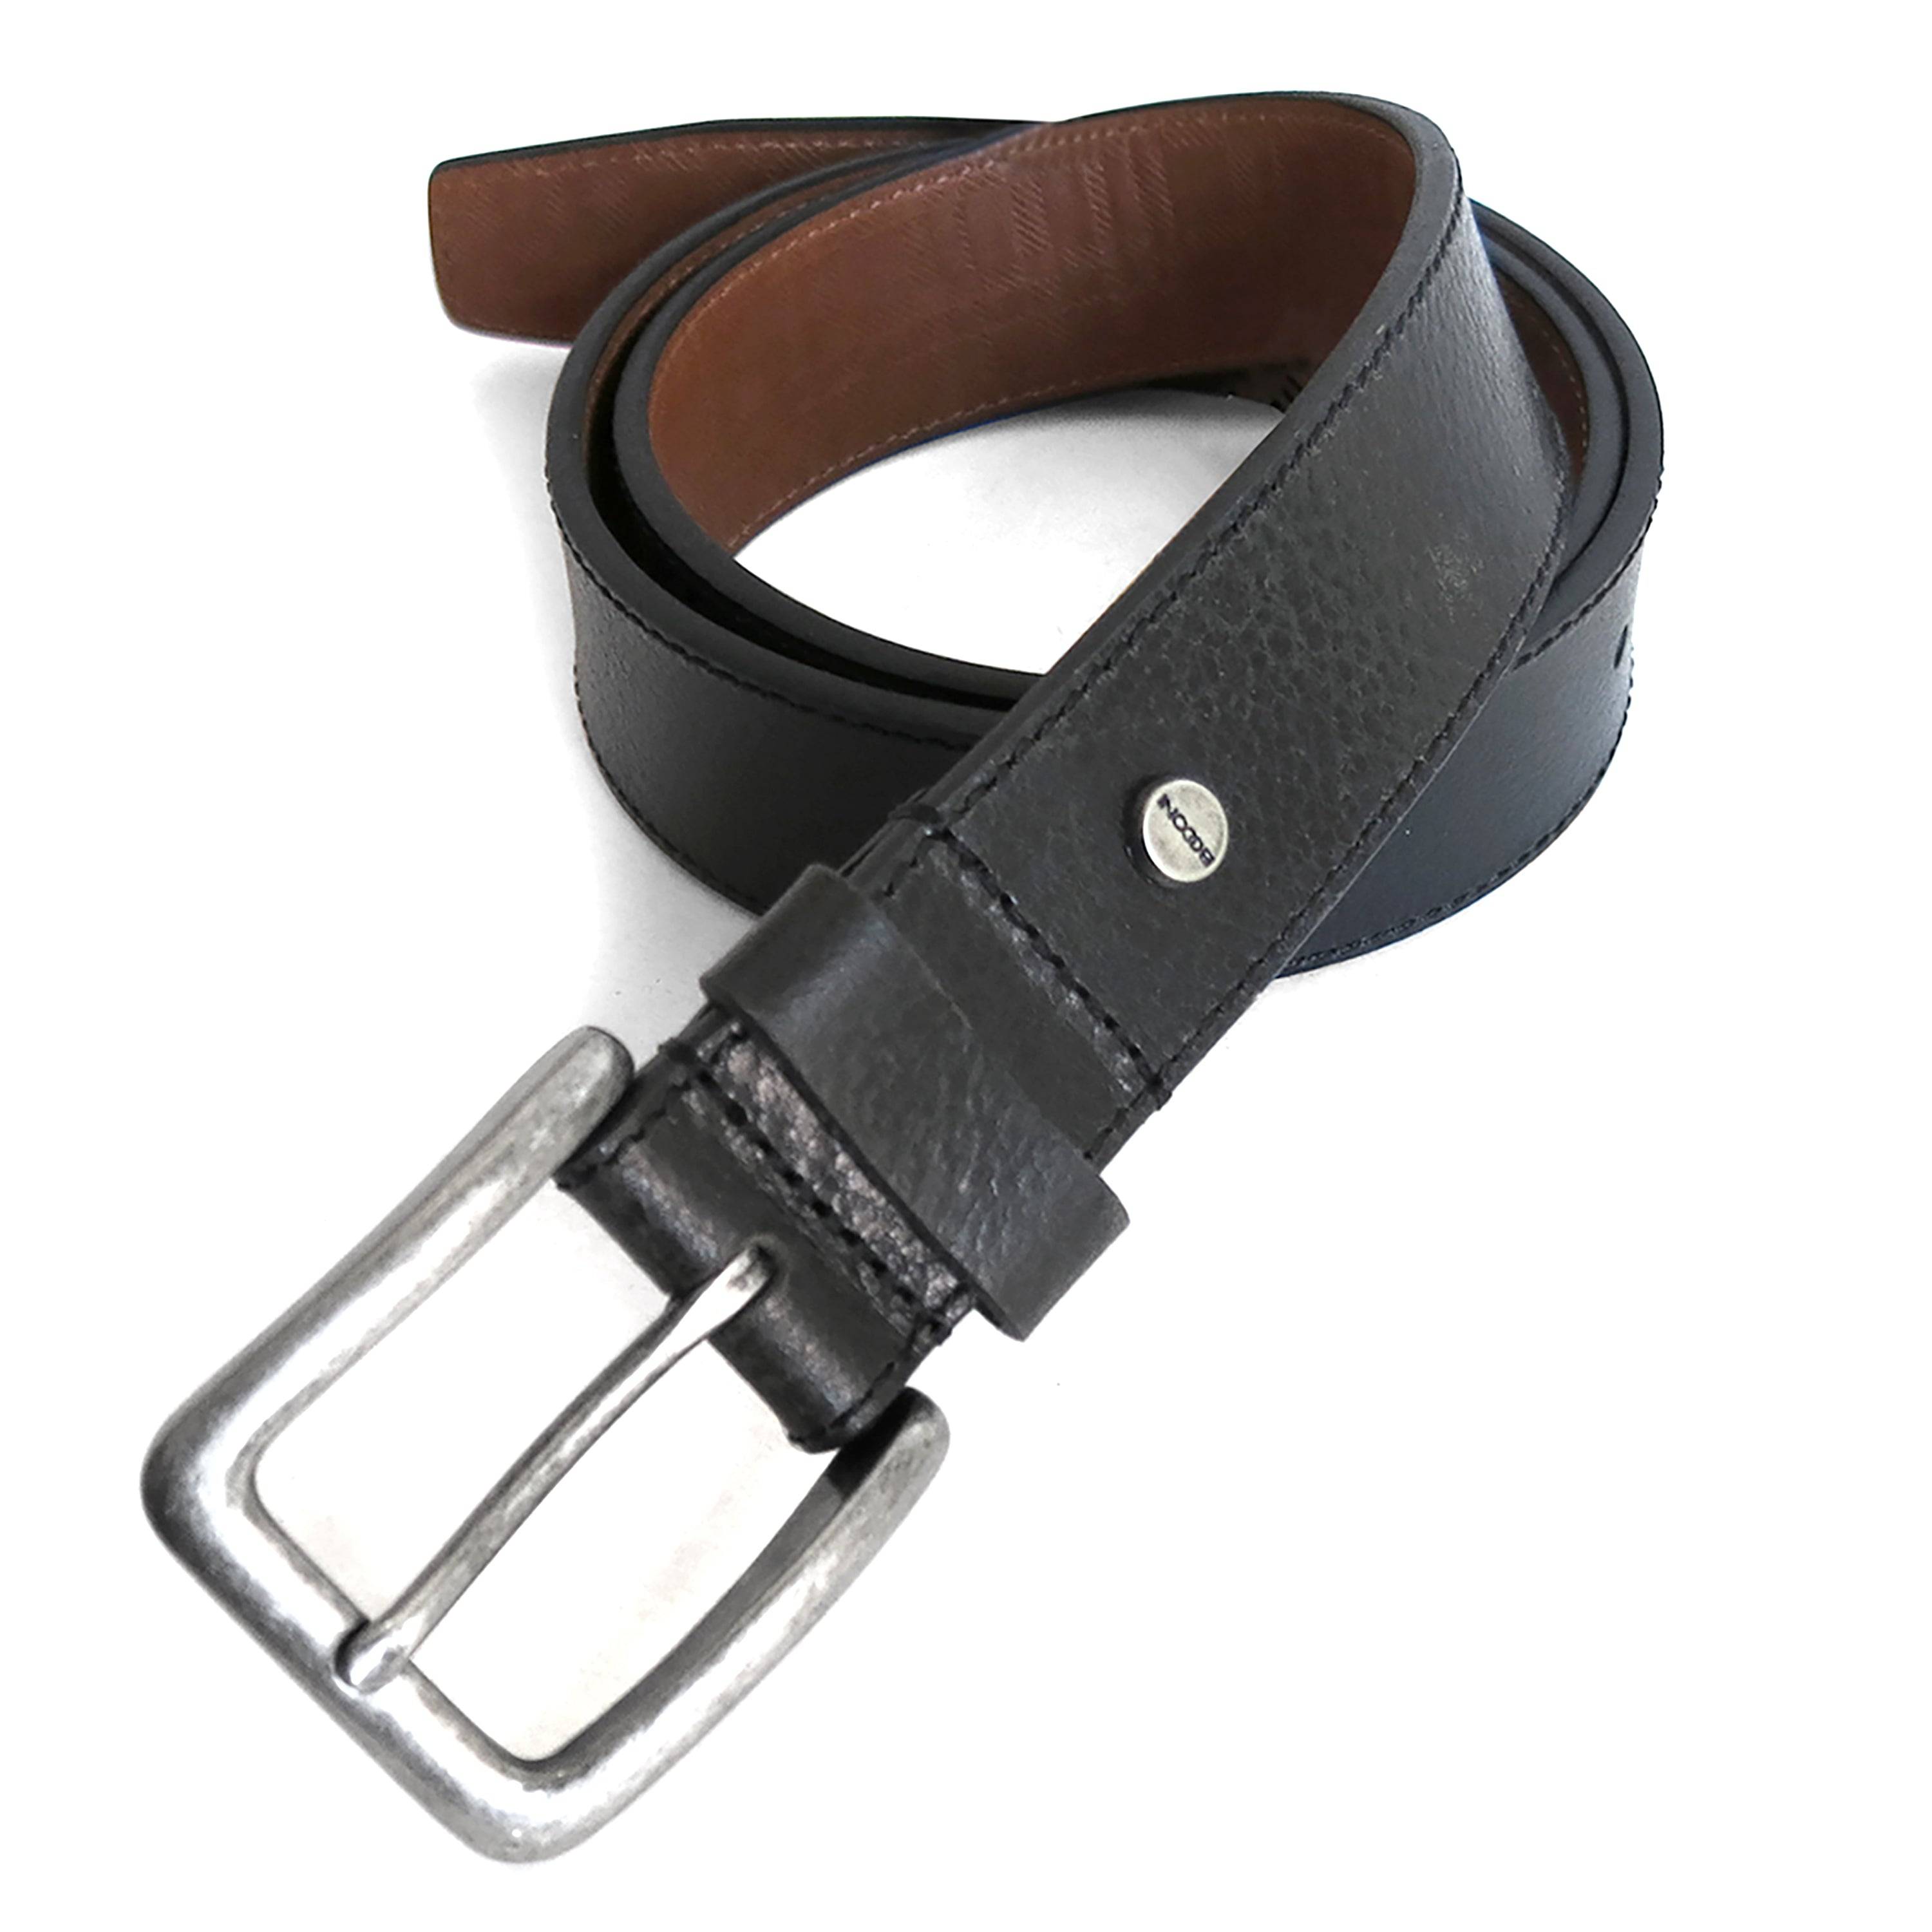 buckle and strap on black genuine leather belt with Boconi ornament